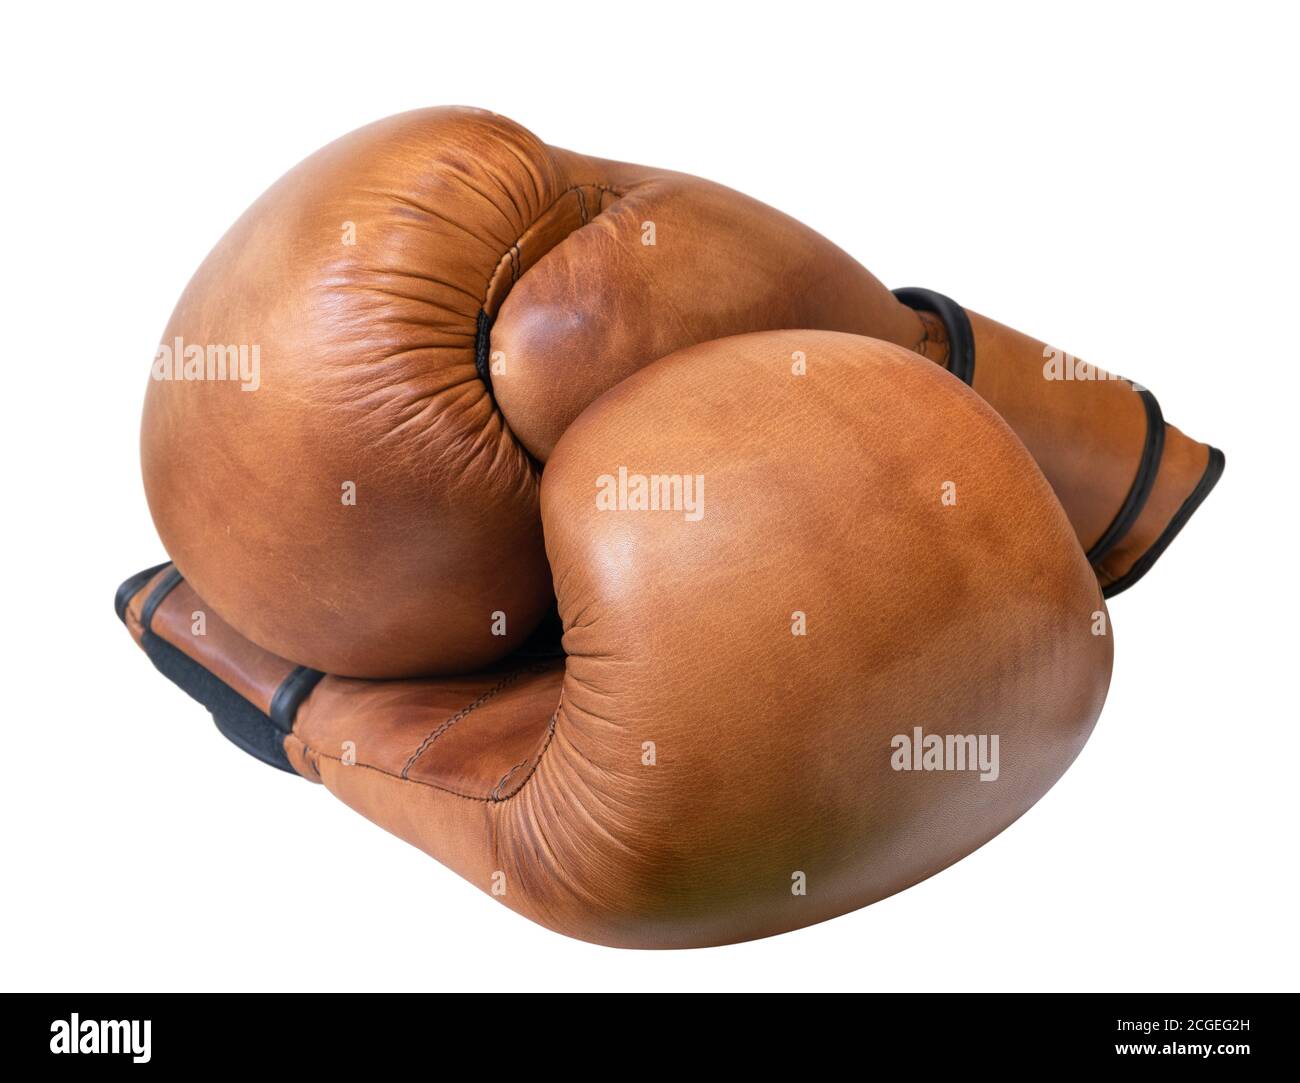 Pair of brown leather boxing gloves isolated on white Stock Photo